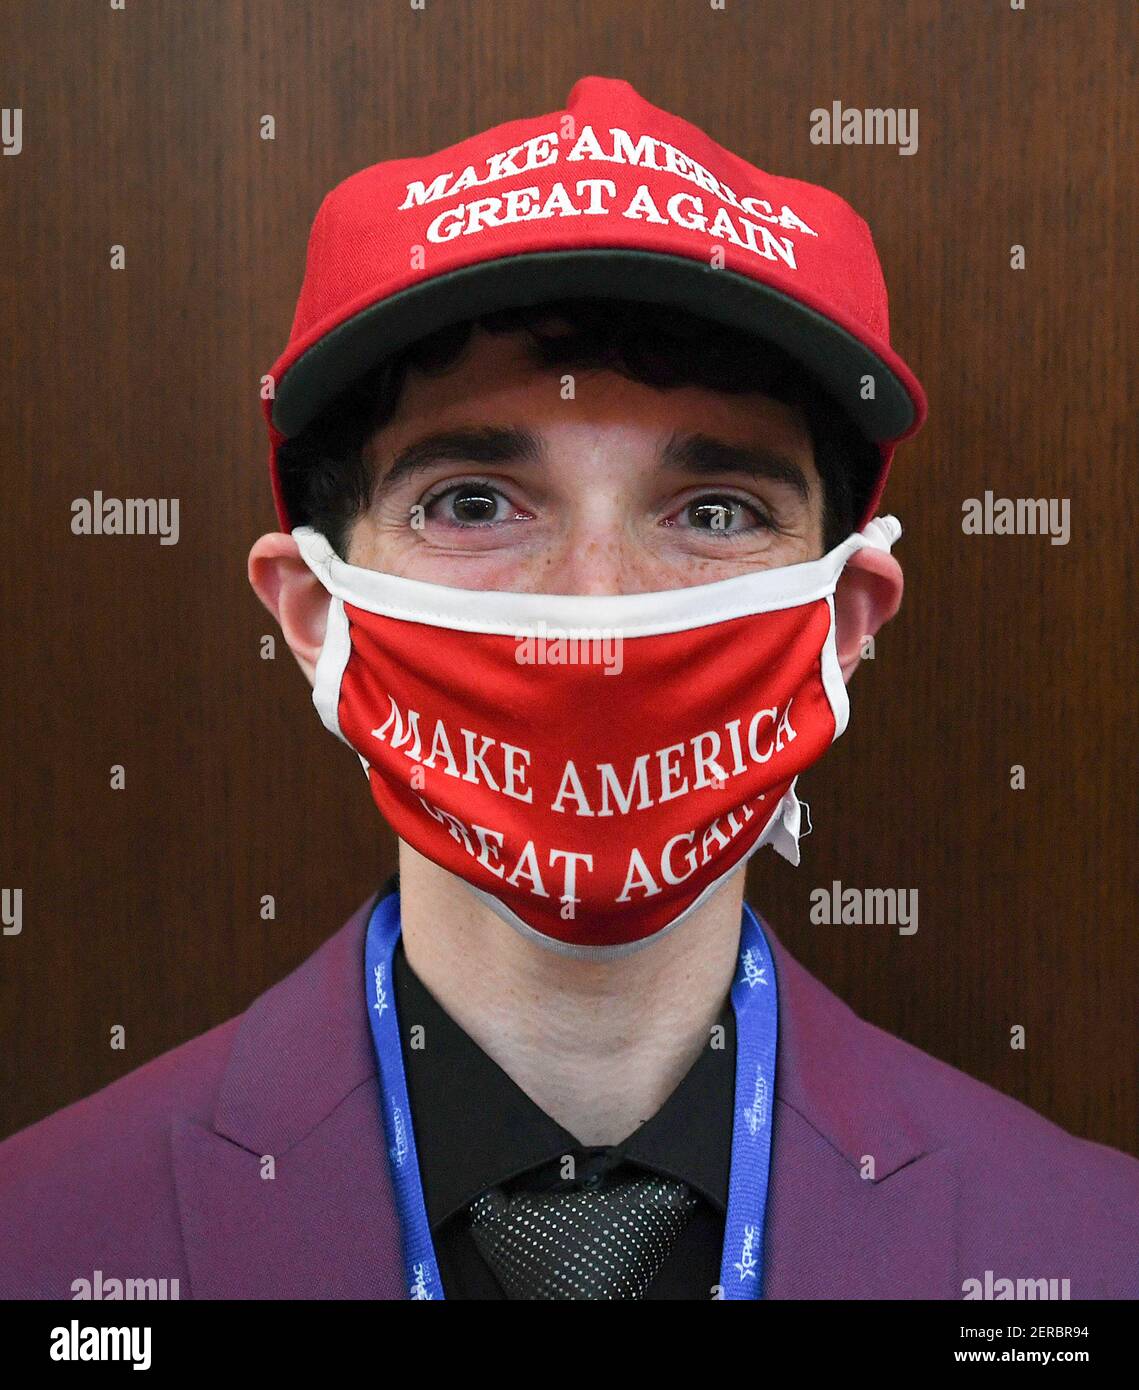 Eric Simon poses wearing a MAGA hat and face mask at the 2021 Conservative Political Action Conference at the Hyatt Regency.  Former U.S. President Donald Trump is scheduled to speak on the final day of the conference. Stock Photo